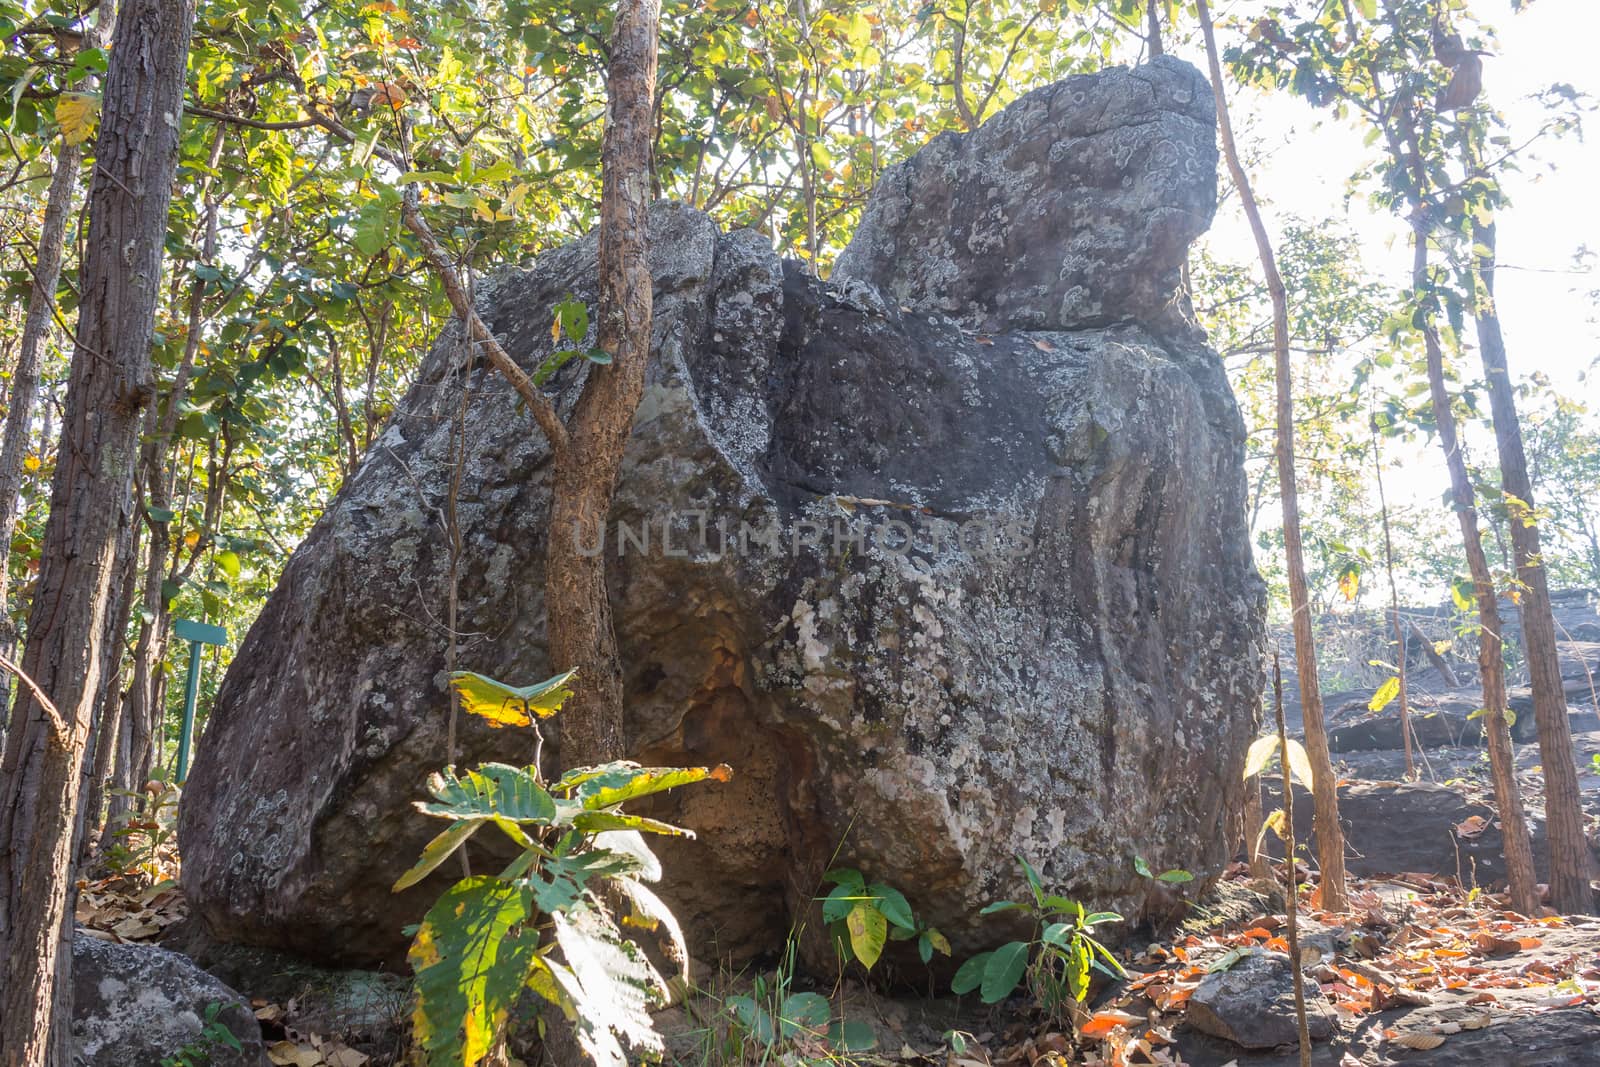 King Seat Stone or Rock at Phayao Attractions Northern Thailand  by steafpong